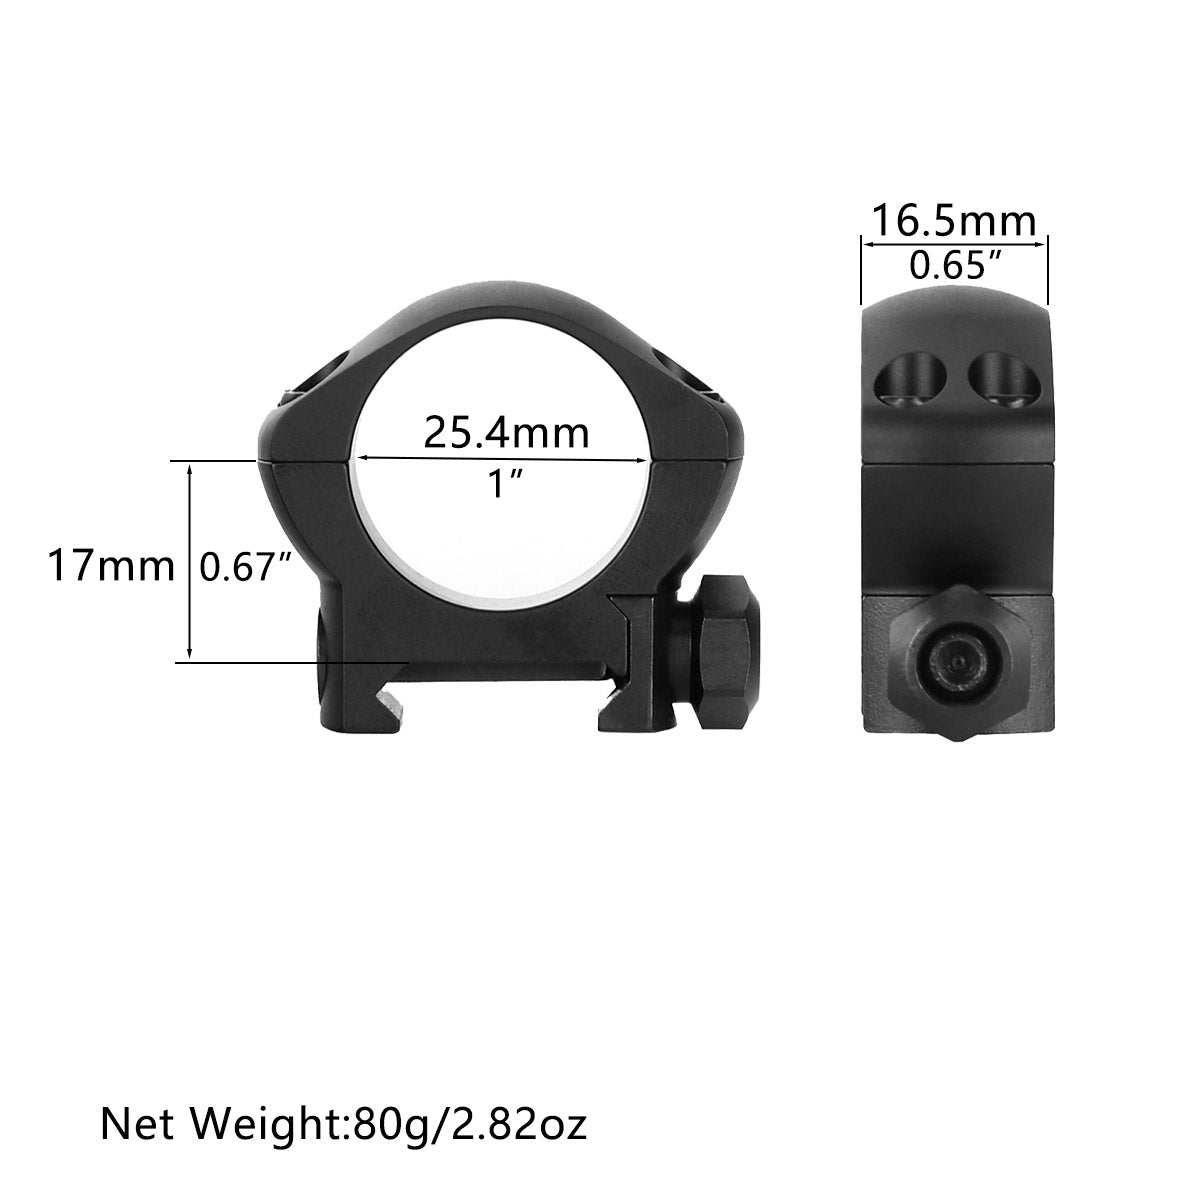 ohhunt® Pro 30mm Scope Rings for Picatinny Rail 7075 Aluminum Ultra Low Profile